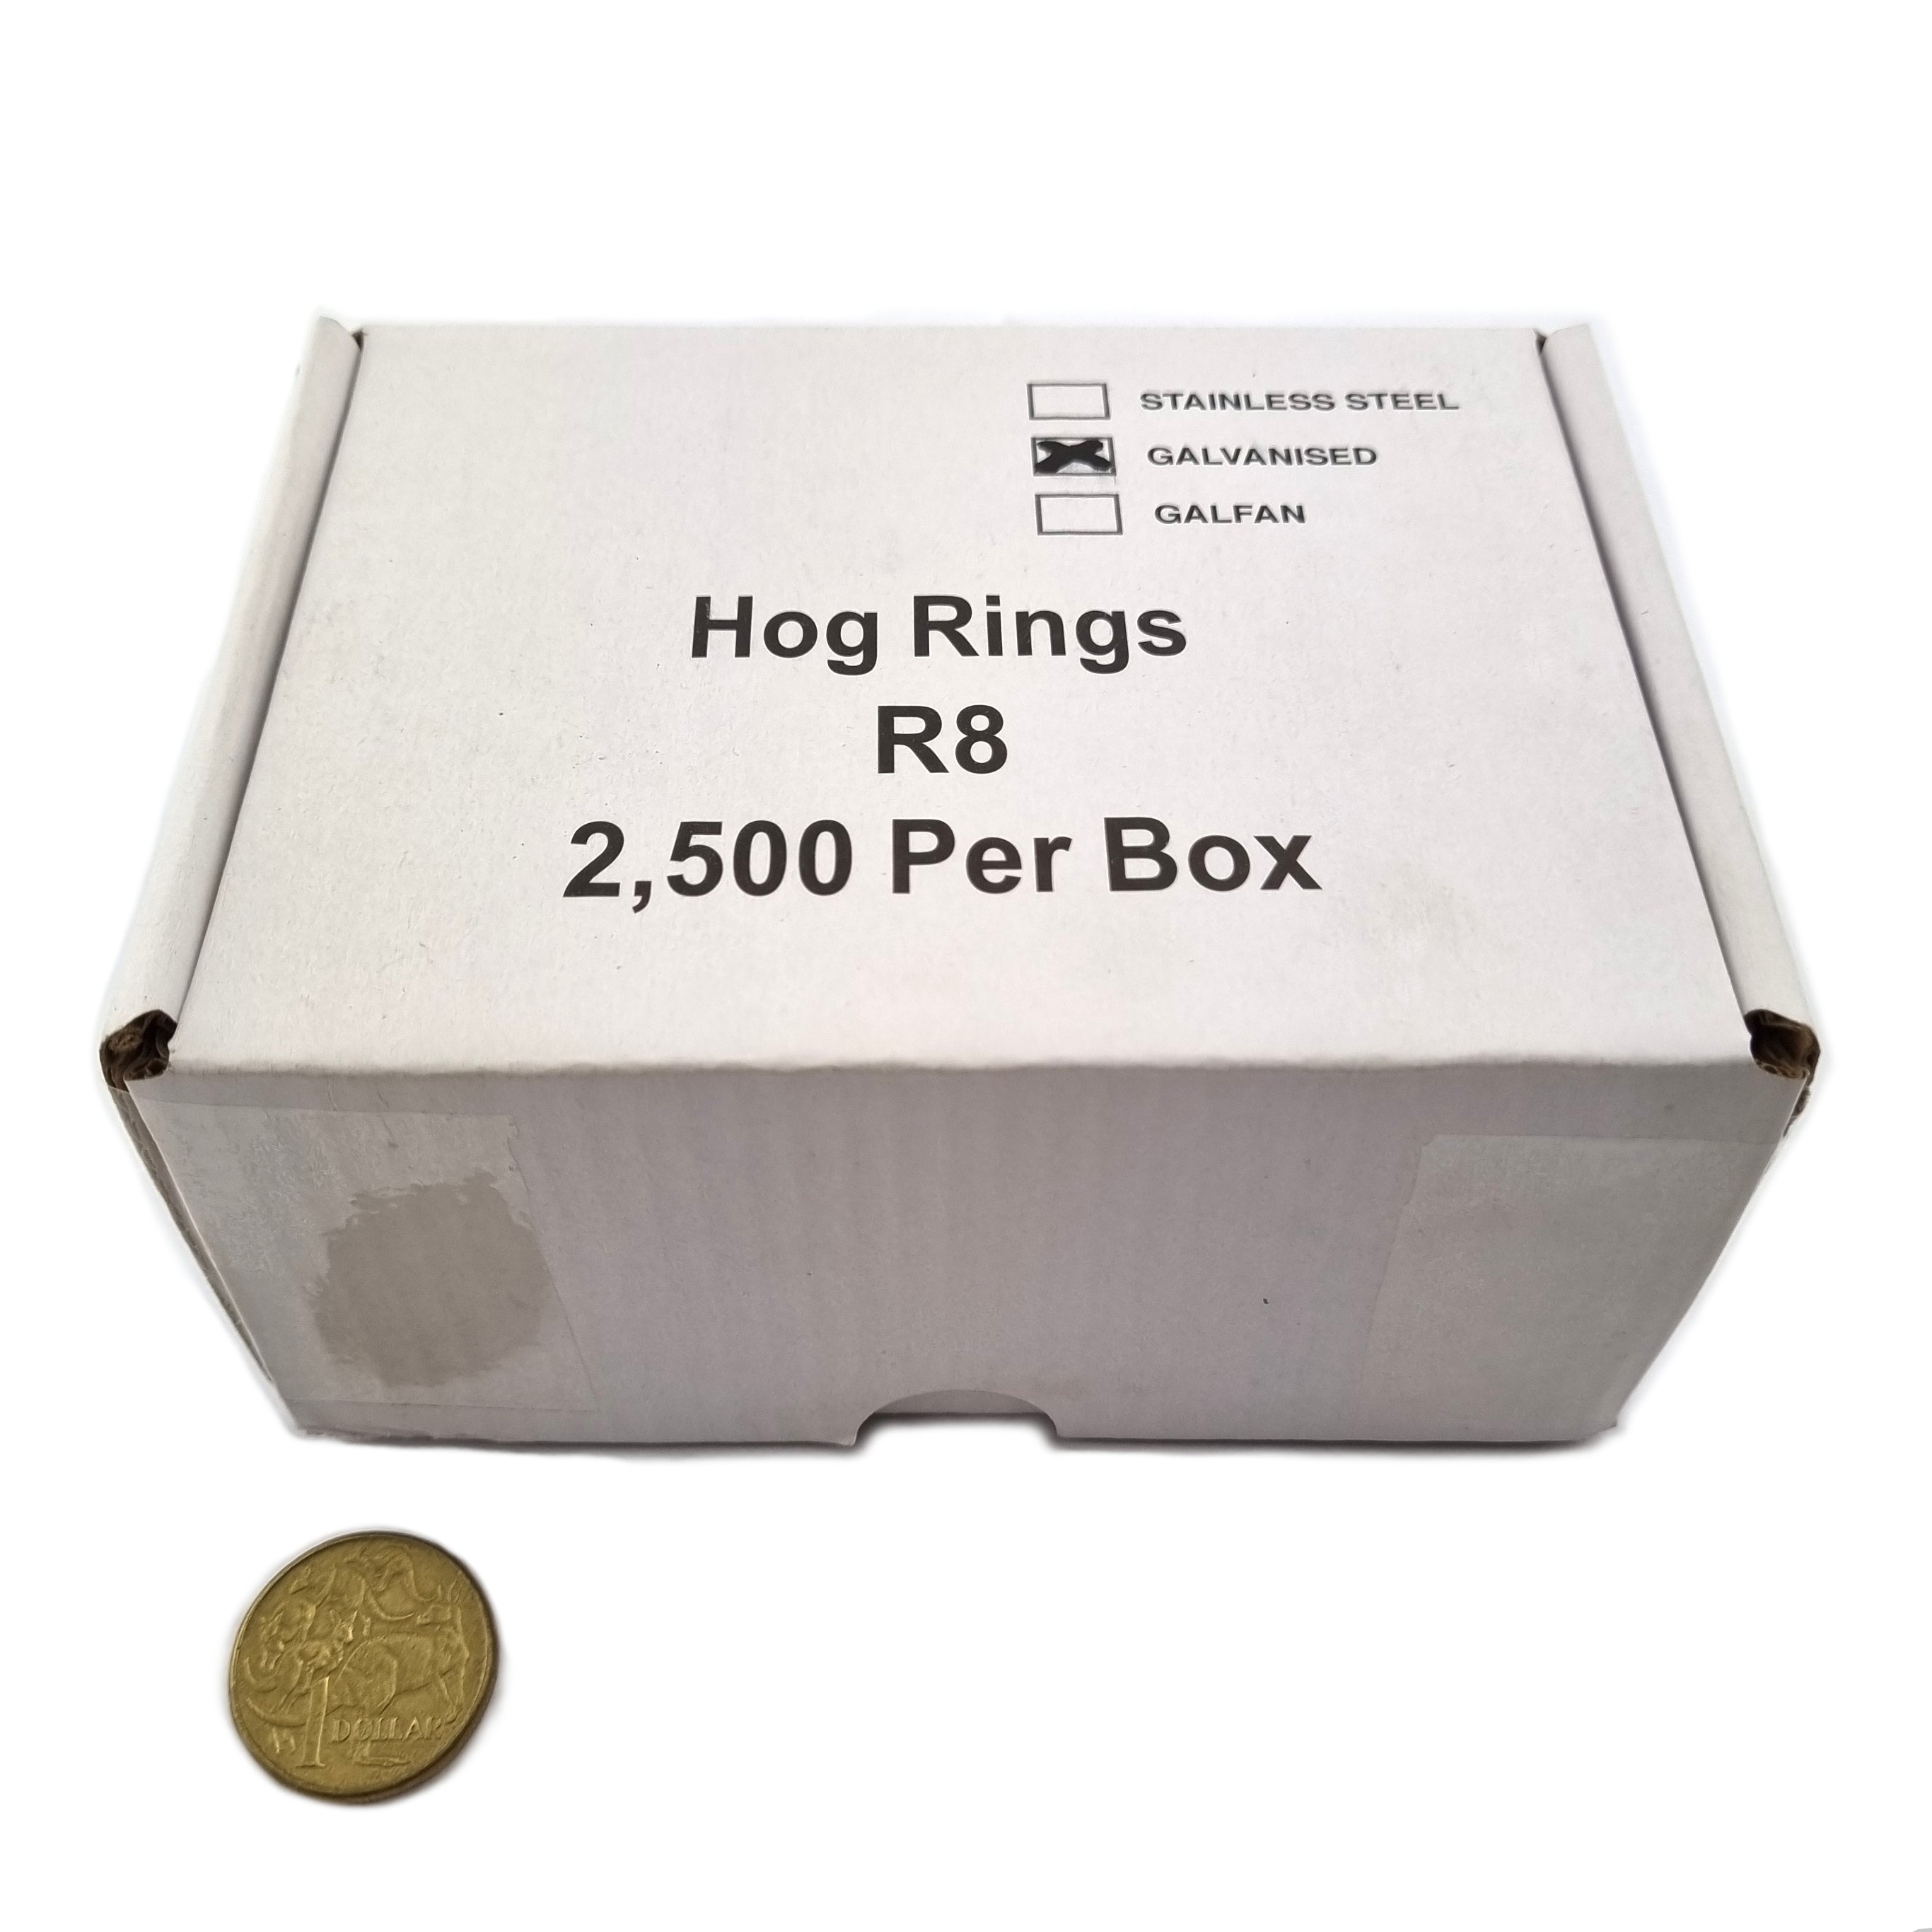 Ring Fasteners (Hog Rings, C Rings or D Rings), Galvanised. Box of 2500. Match with Ring Fastener Gun. Shop chain.com.au